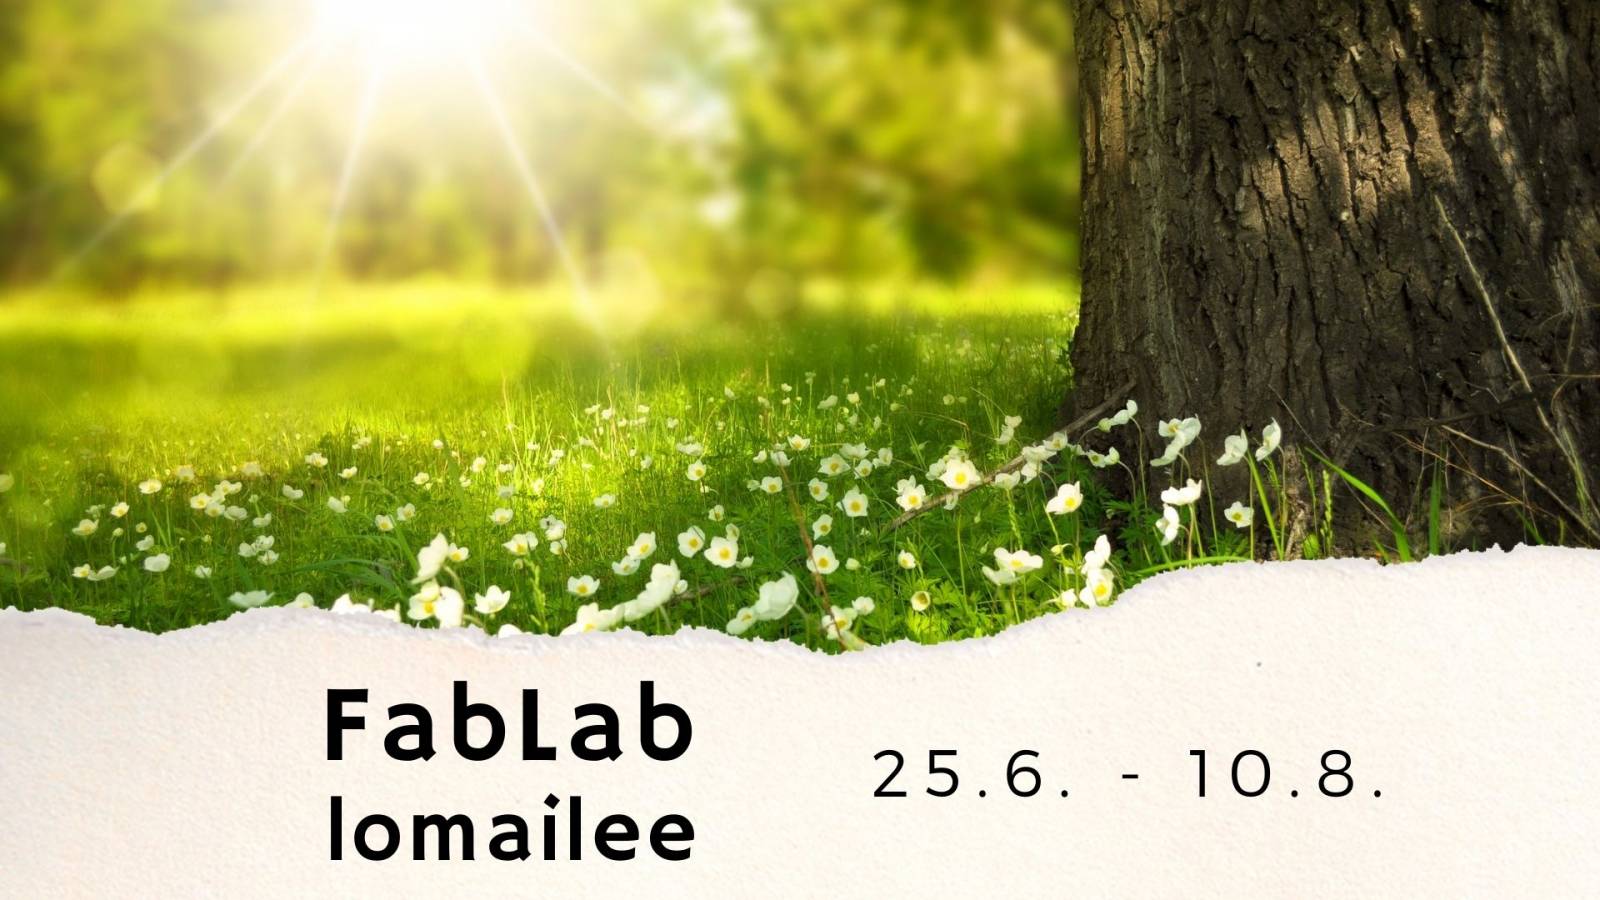 FabLab lomailee 25.6. - 10.8.